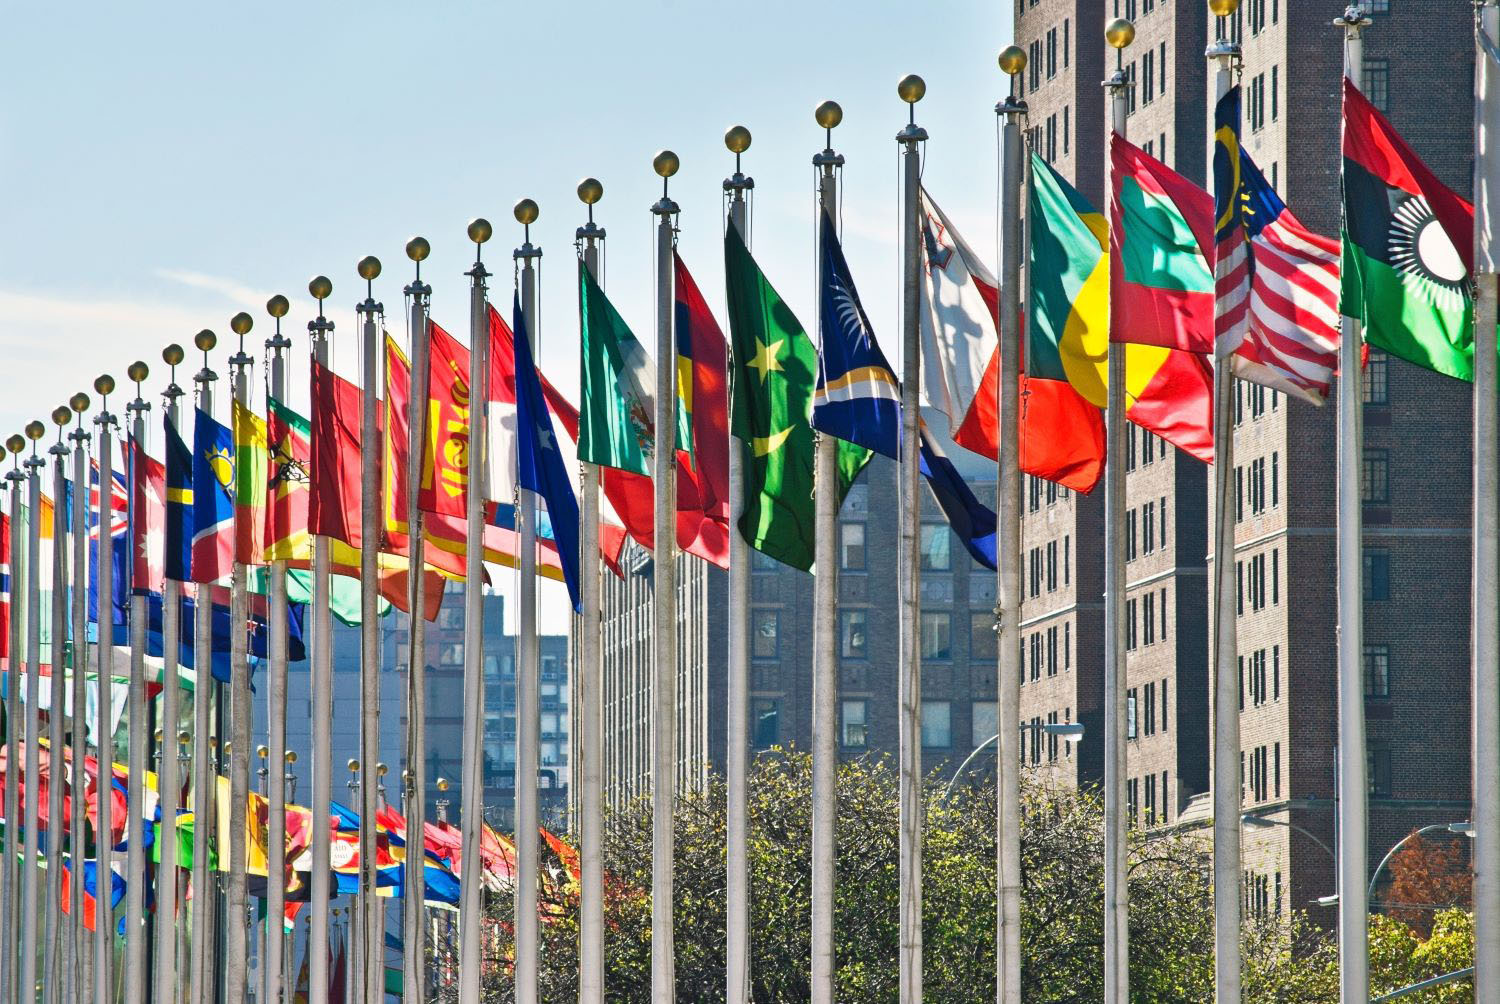 Flags outside the UN